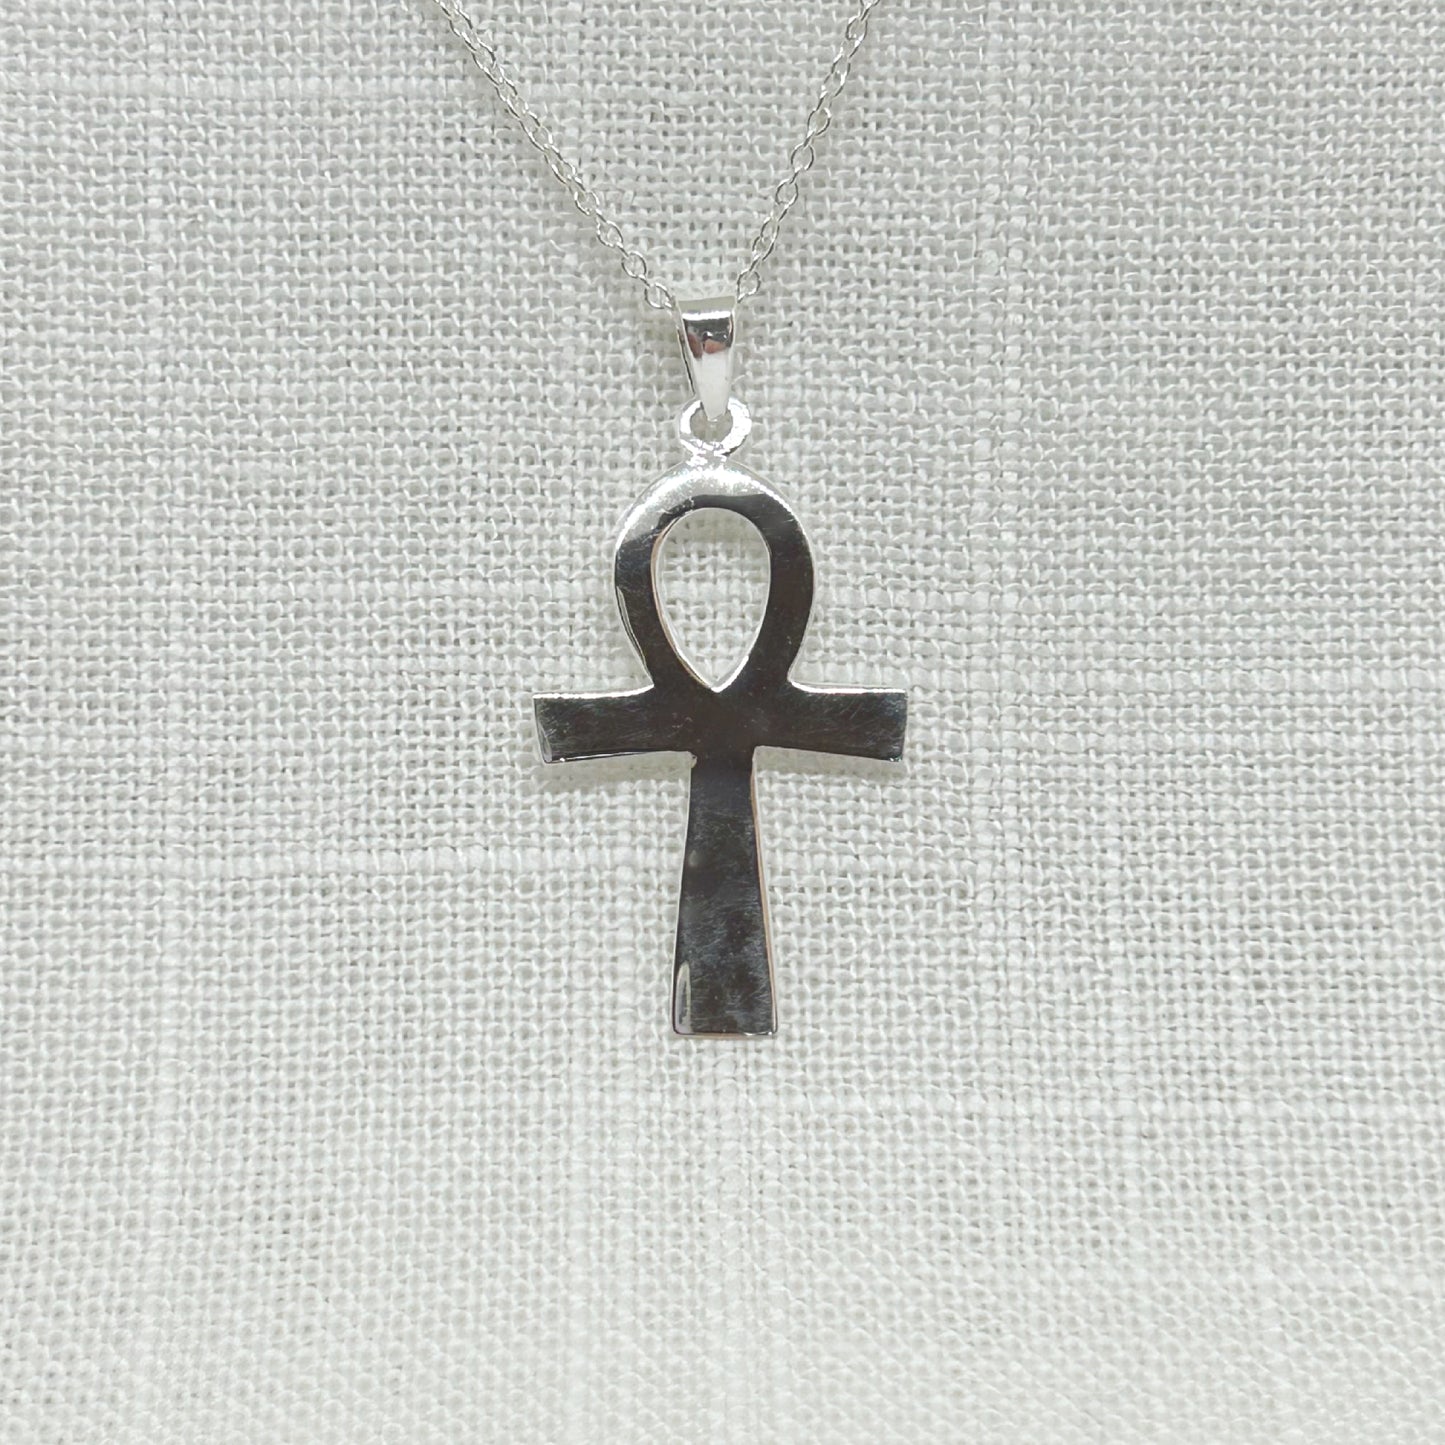 This beautiful Ankh is highly polished and is approx 3.9cms long including the bale.  All pendants come supplied on a 20 inch silver chain and arrive in a gift box. Ankh Drop Earrings and XL Ankh Necklace are also available on the website